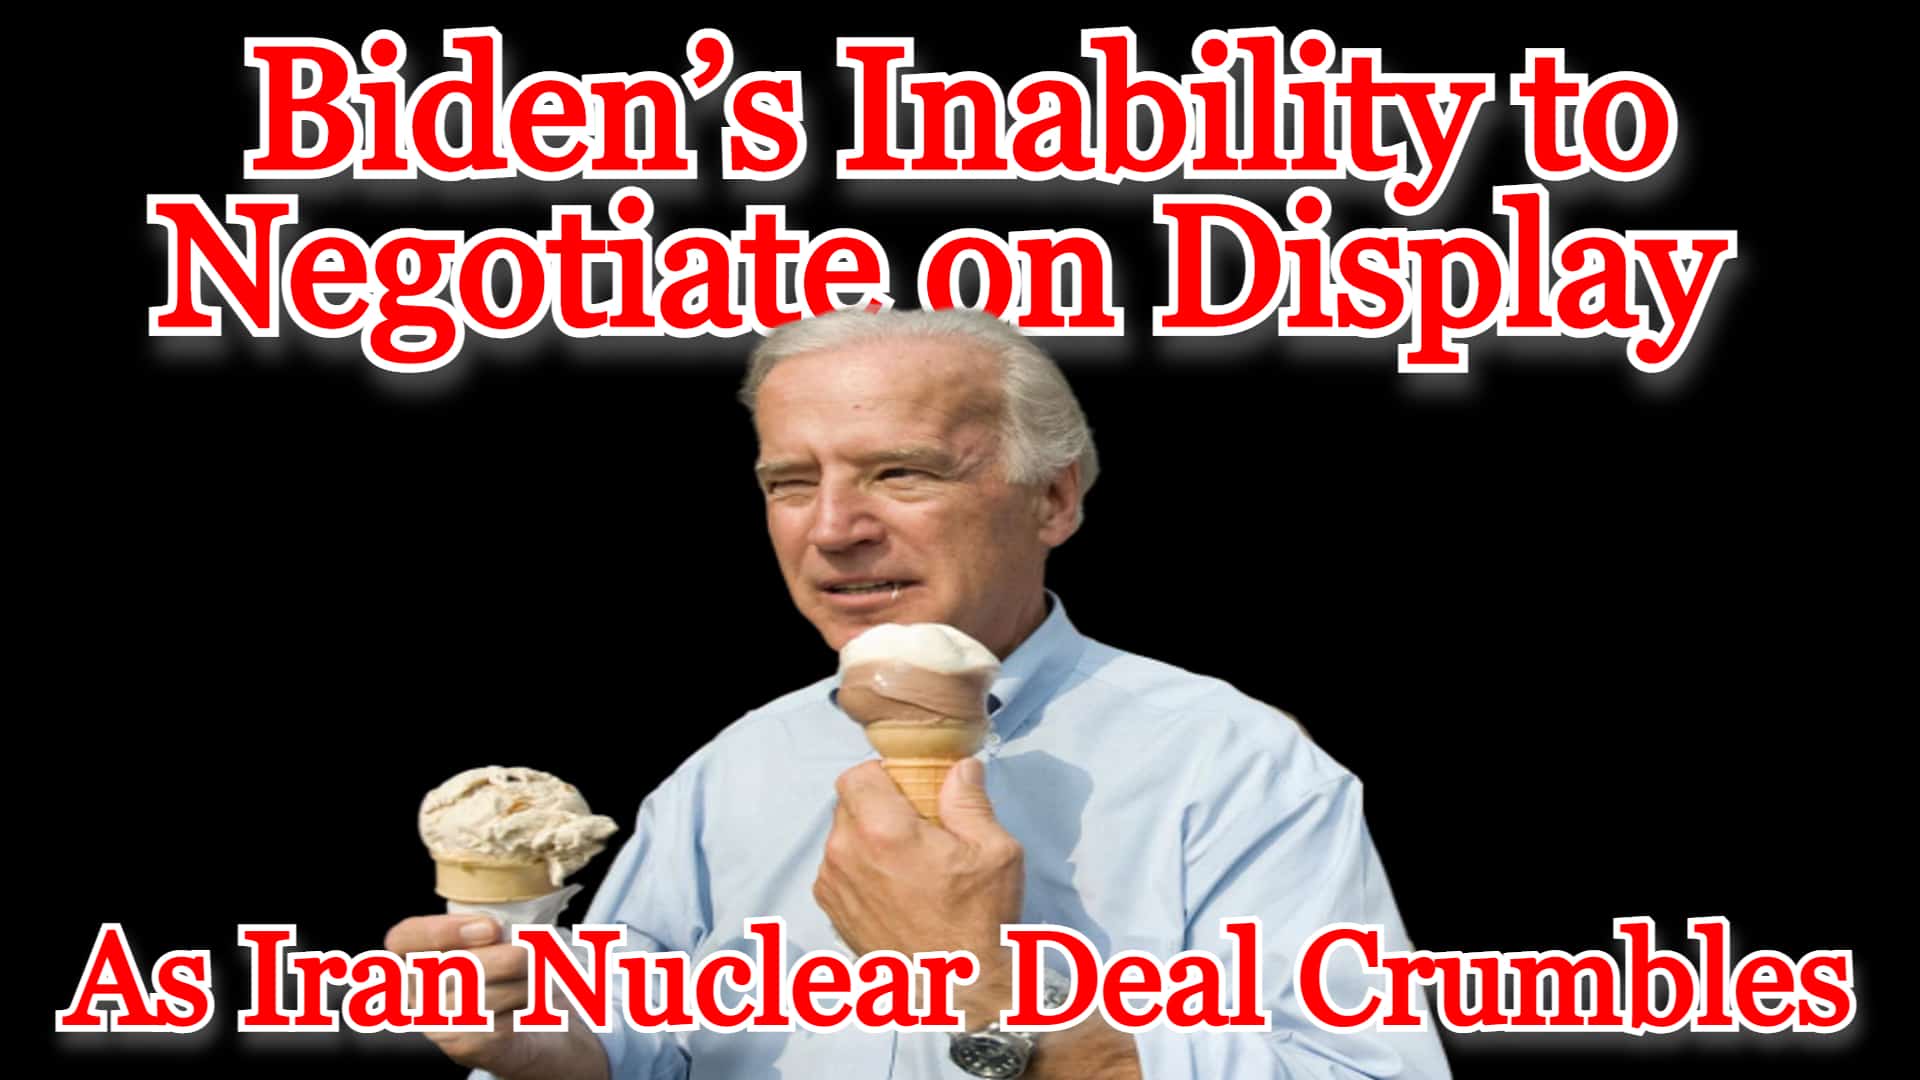 COI #286: Biden’s Inability to Negotiate on Display as Iran Nuclear Deal Crumbles